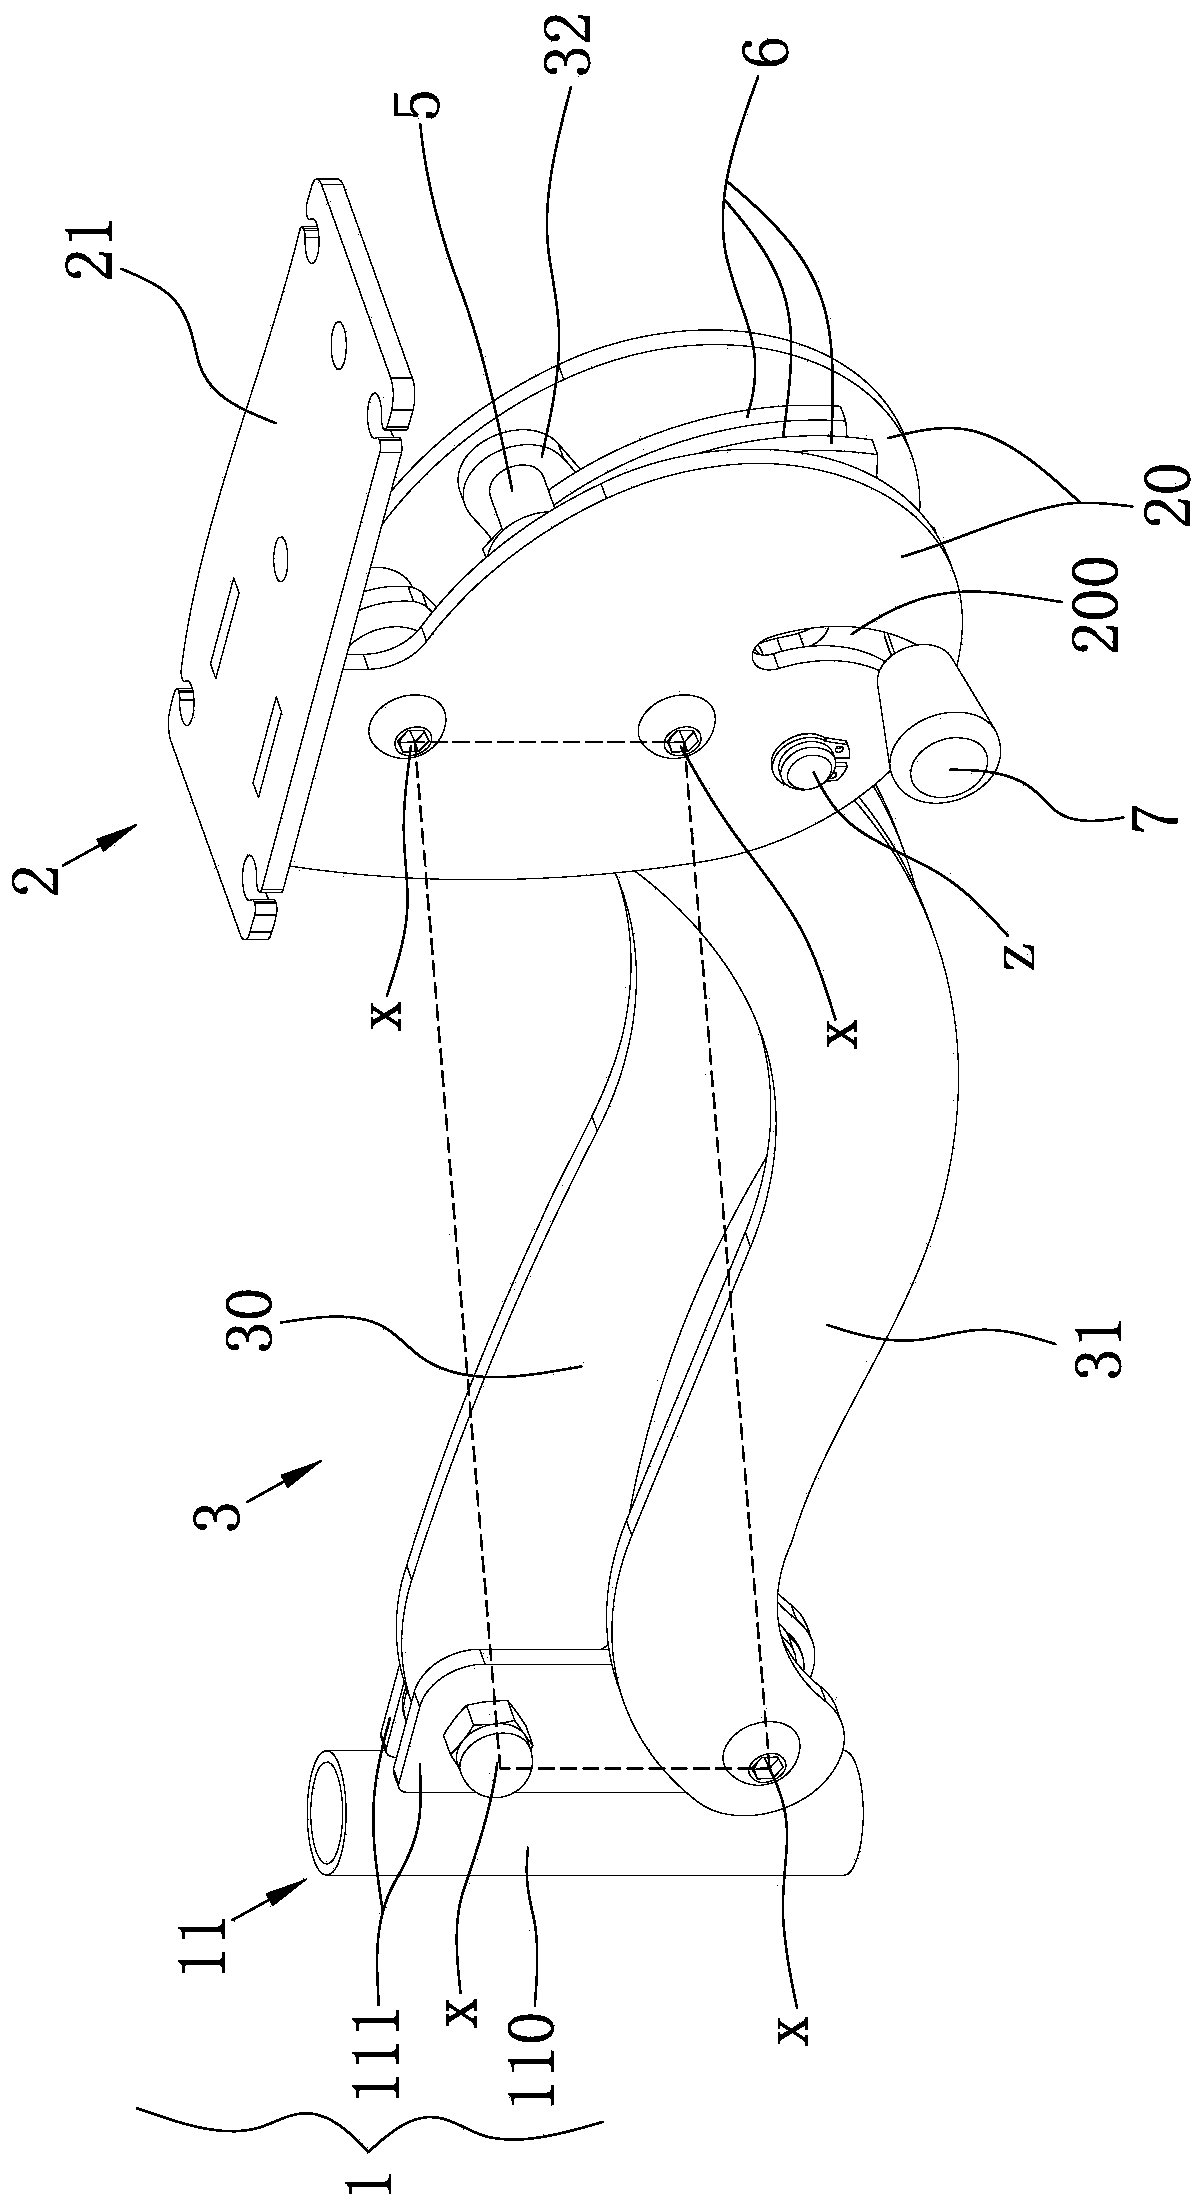 Arm supporting structure for medical diagnosis and treatment bed